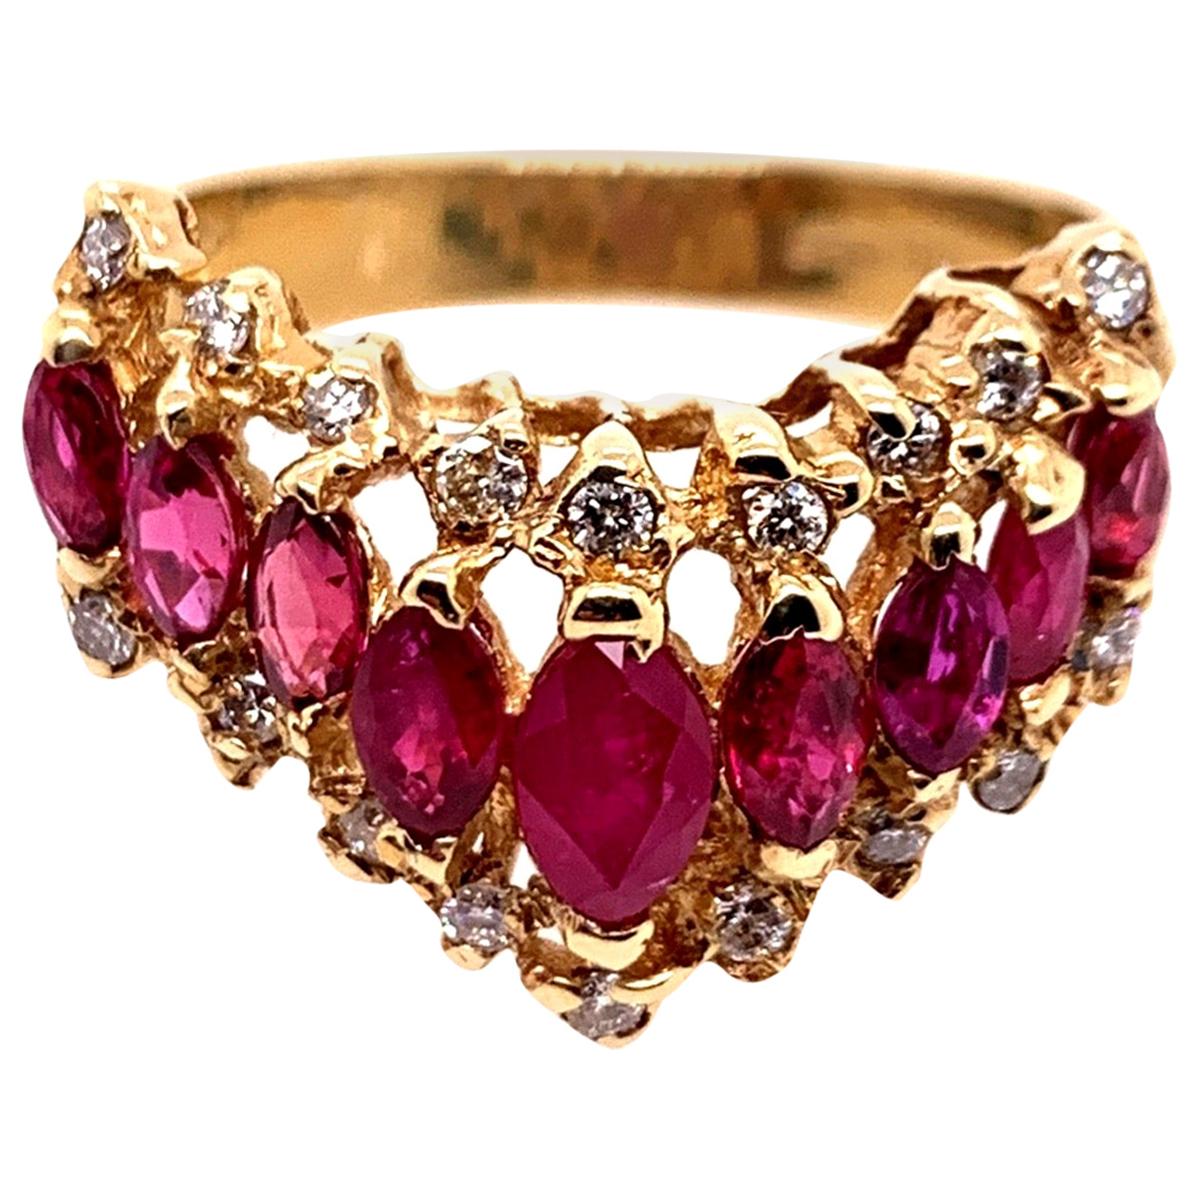 Retro Gold 1.15 Carat Natural Marquise Ruby and Diamond Cocktail Ring circa 1960